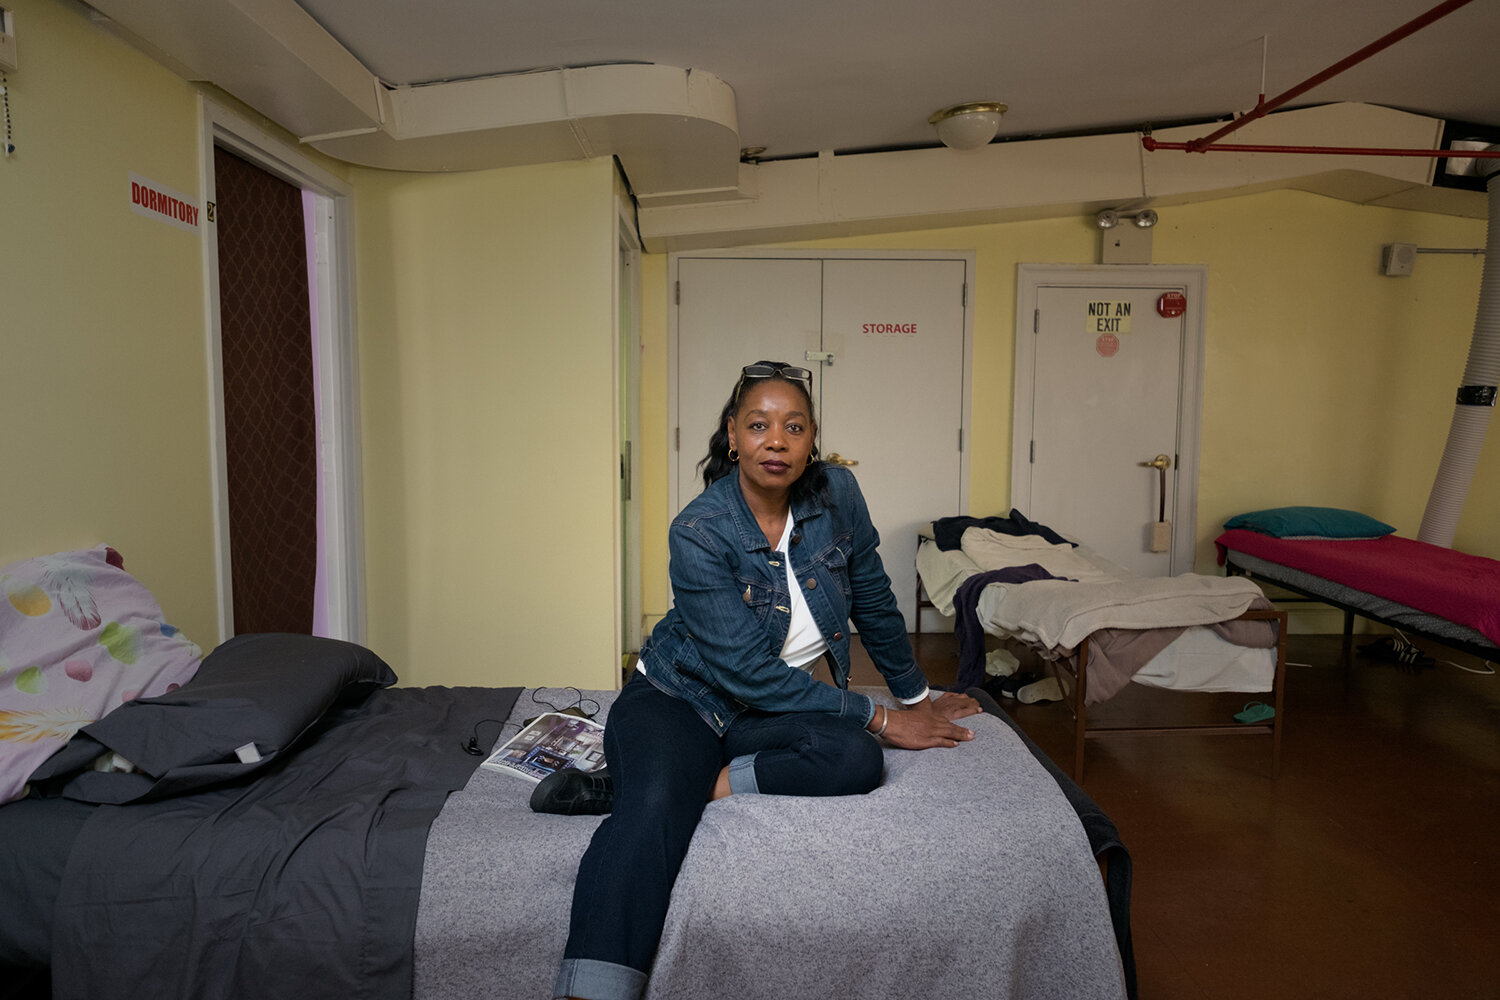  Annette, 59, in a homeless shelter six weeks after her release. East Village, NY, 2018. Image © Sara Bennett. 